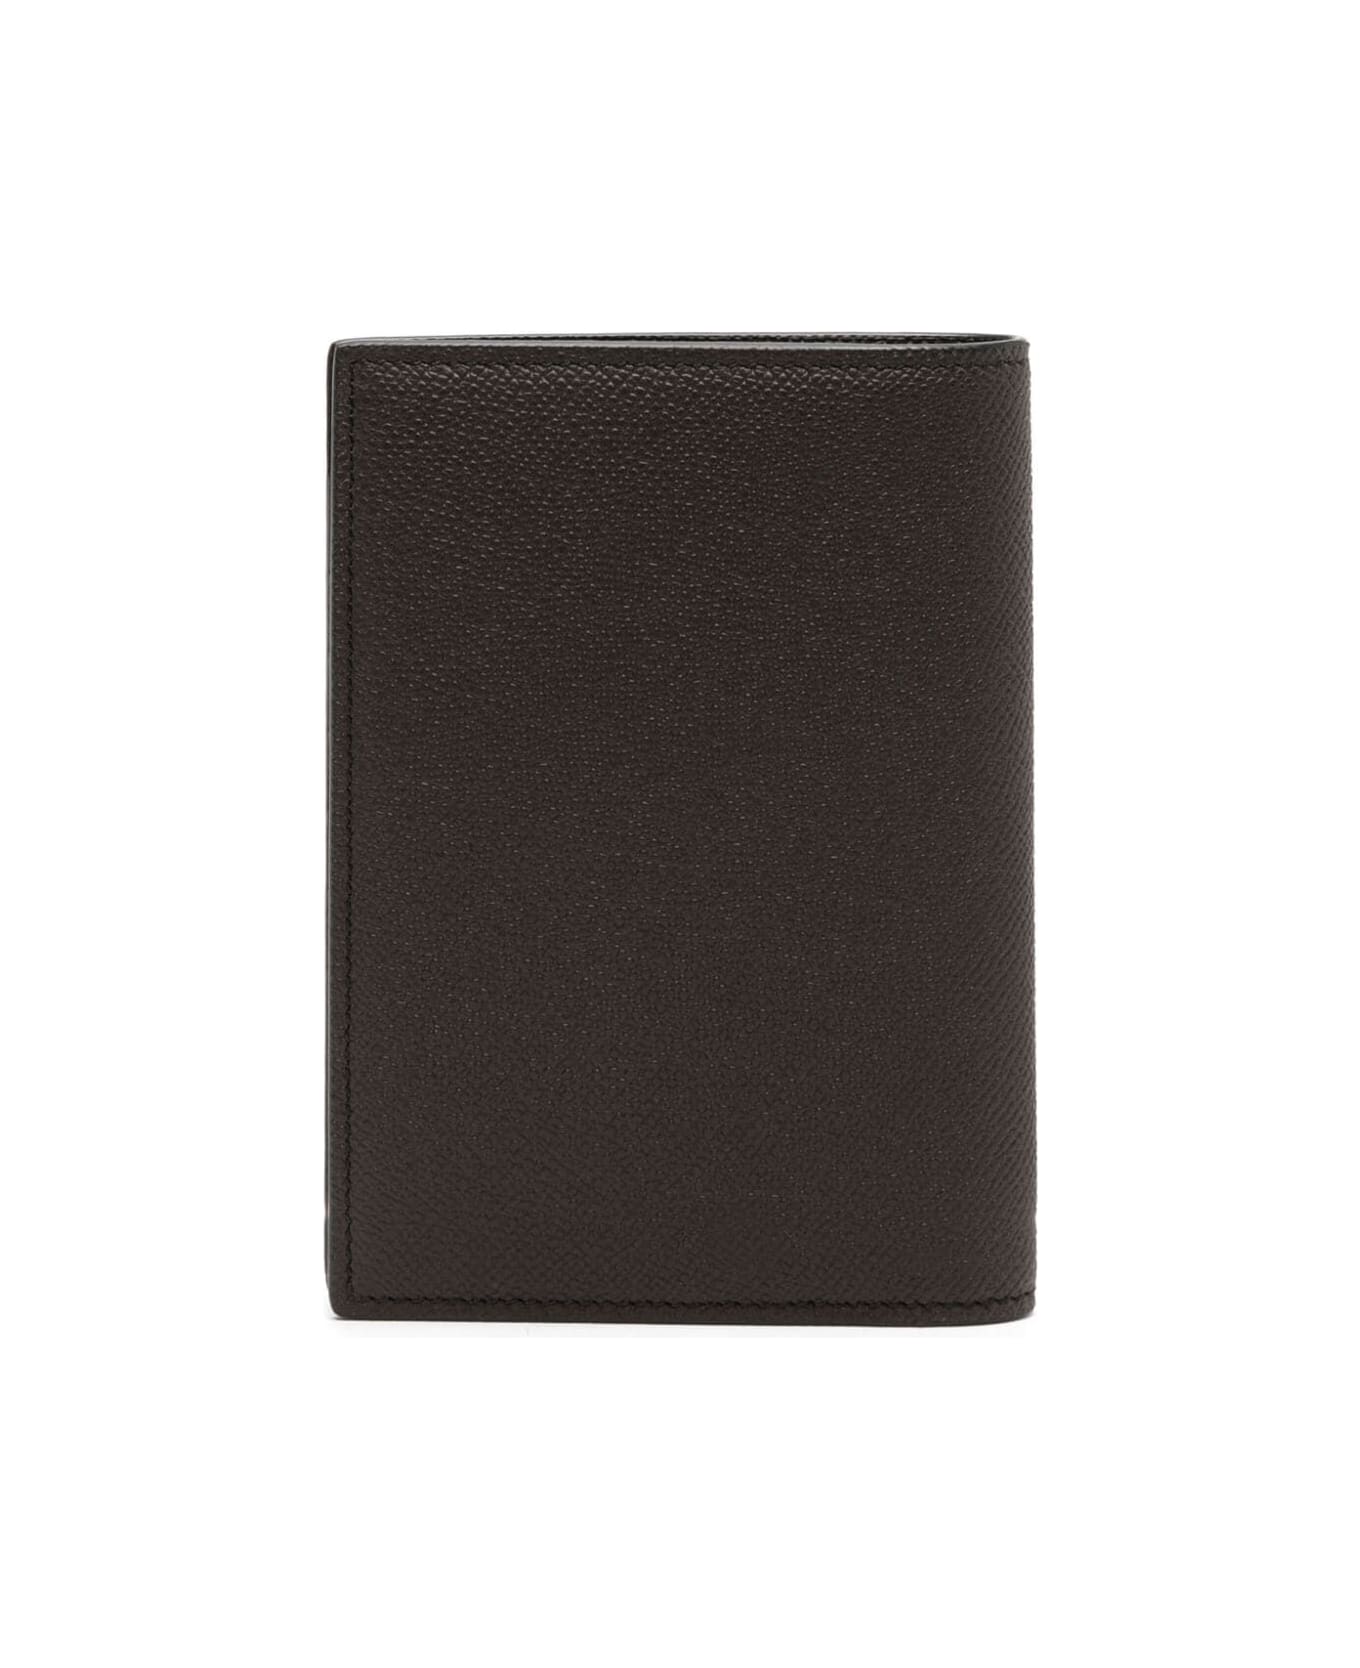 Tom Ford Stationary Wallet - Chocolate